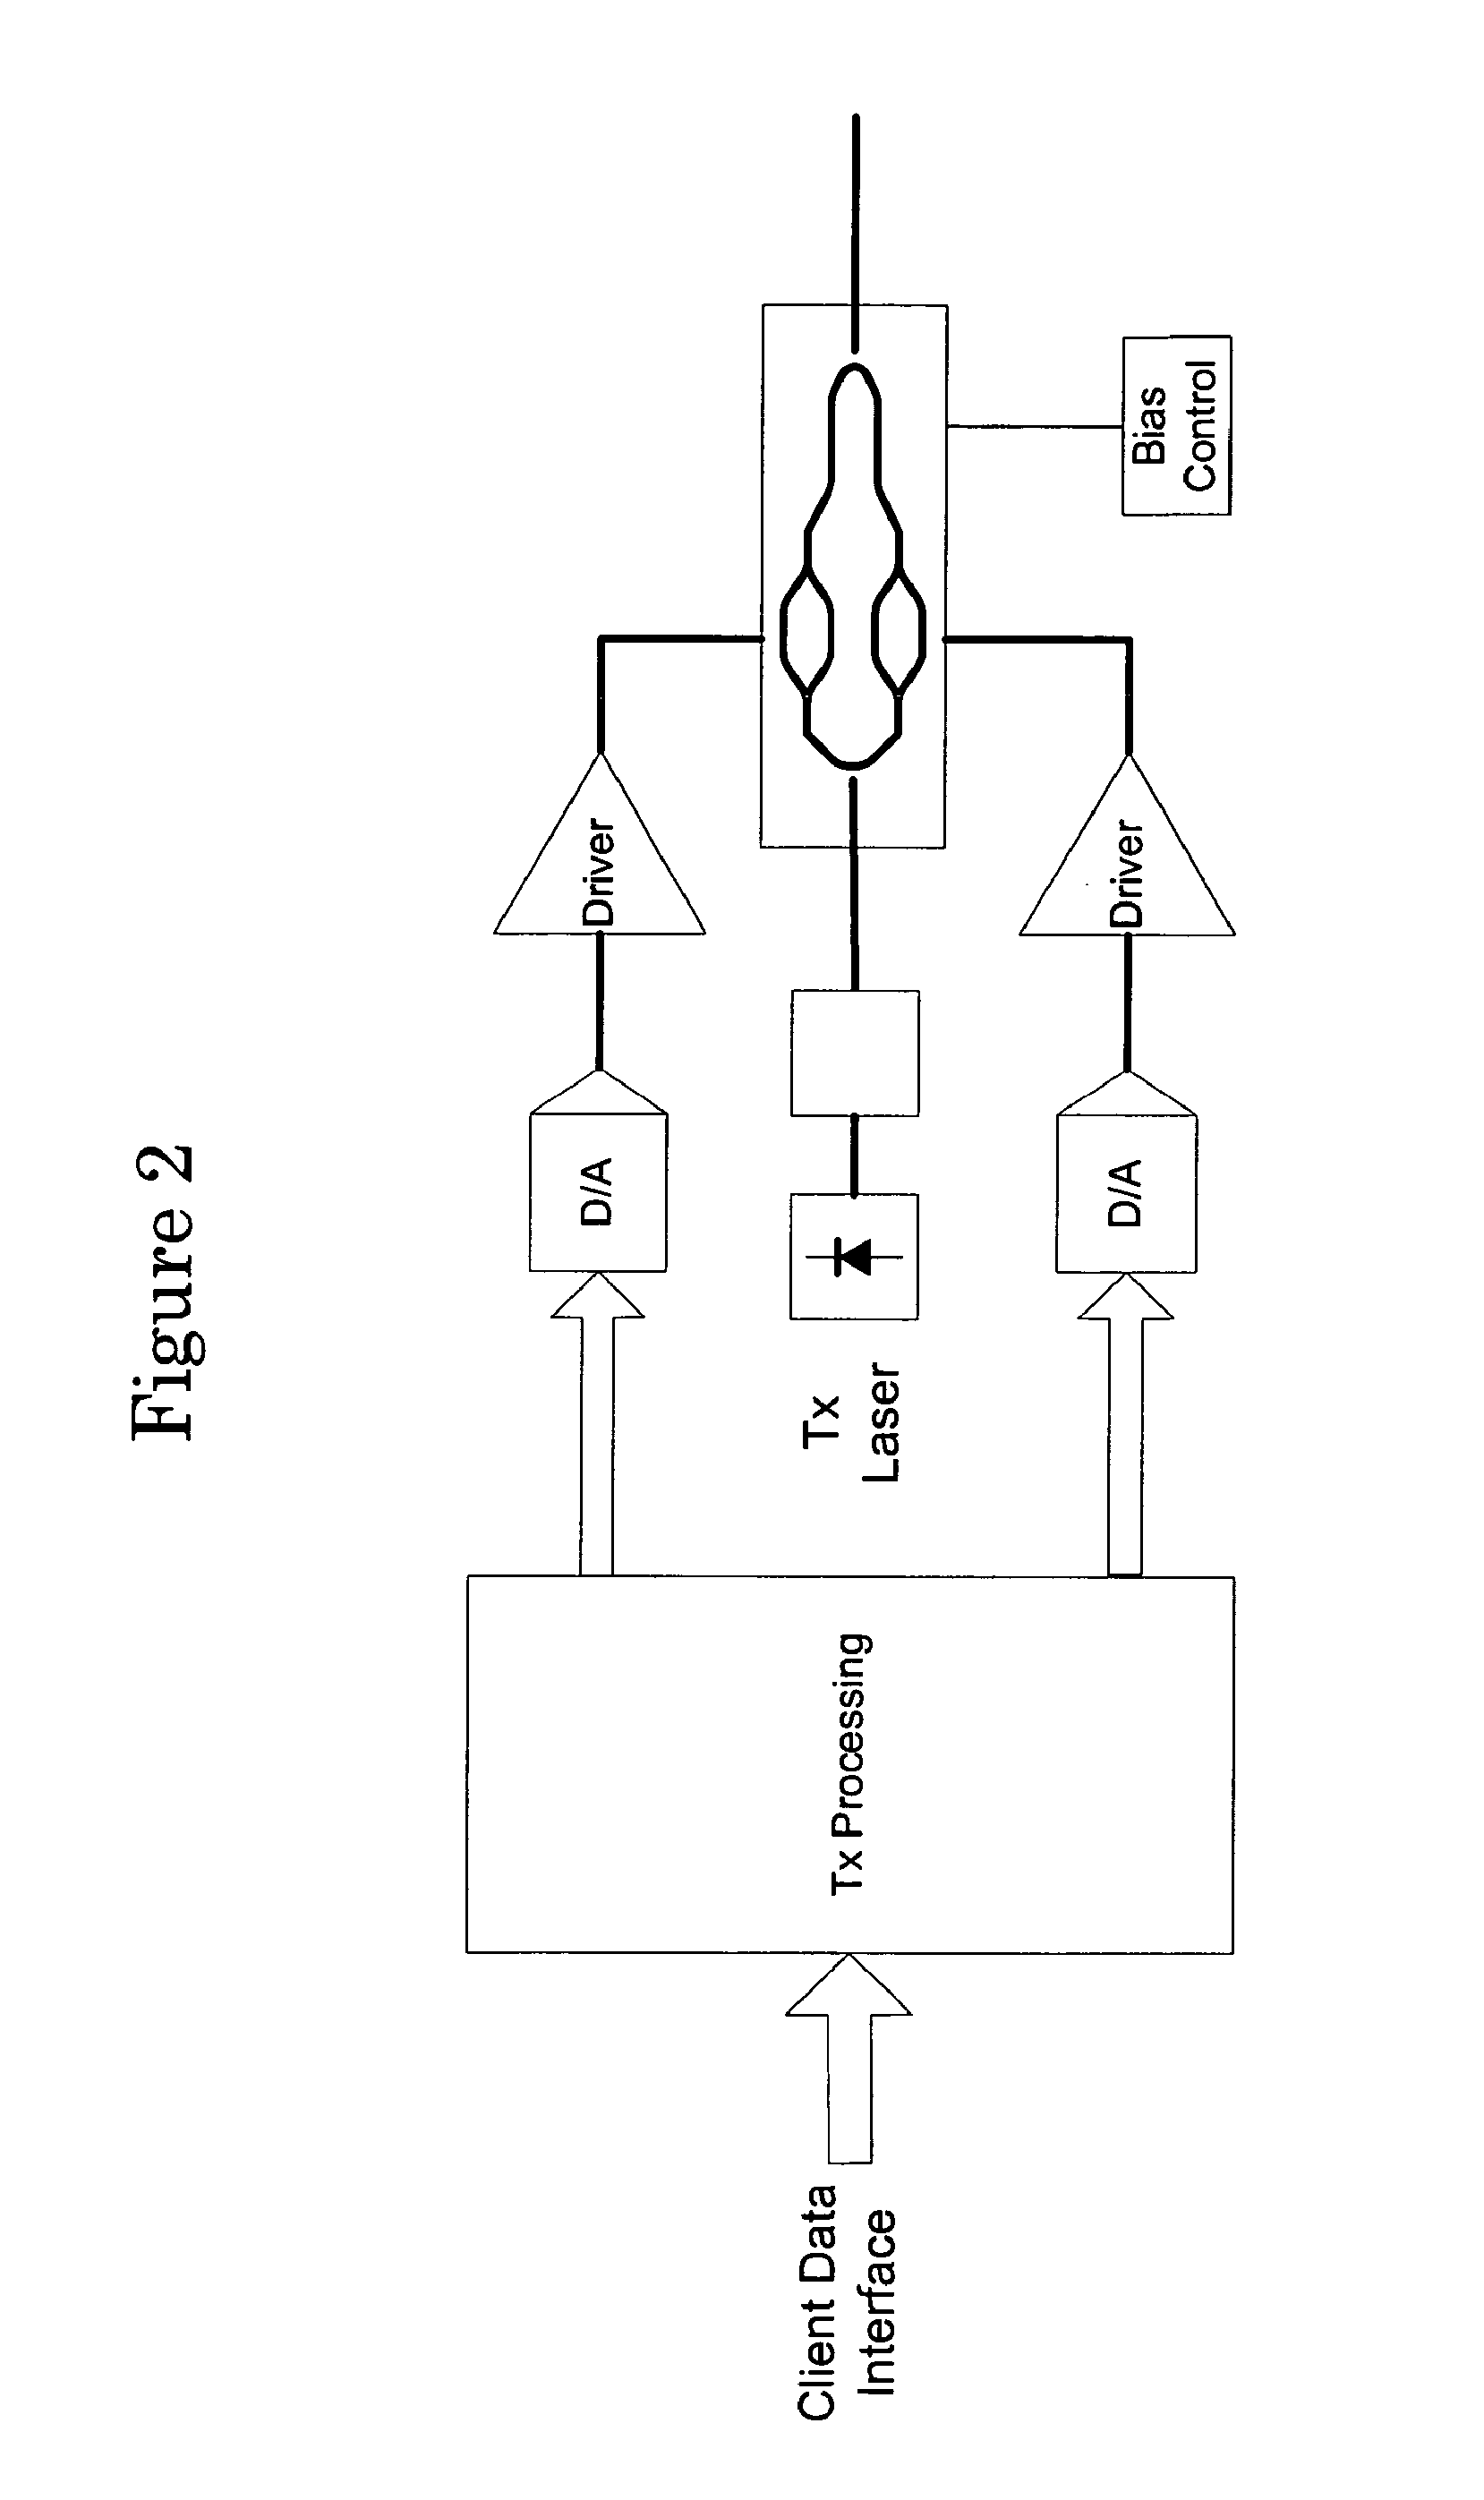 Optical transmission apparatuses, methods, and systems